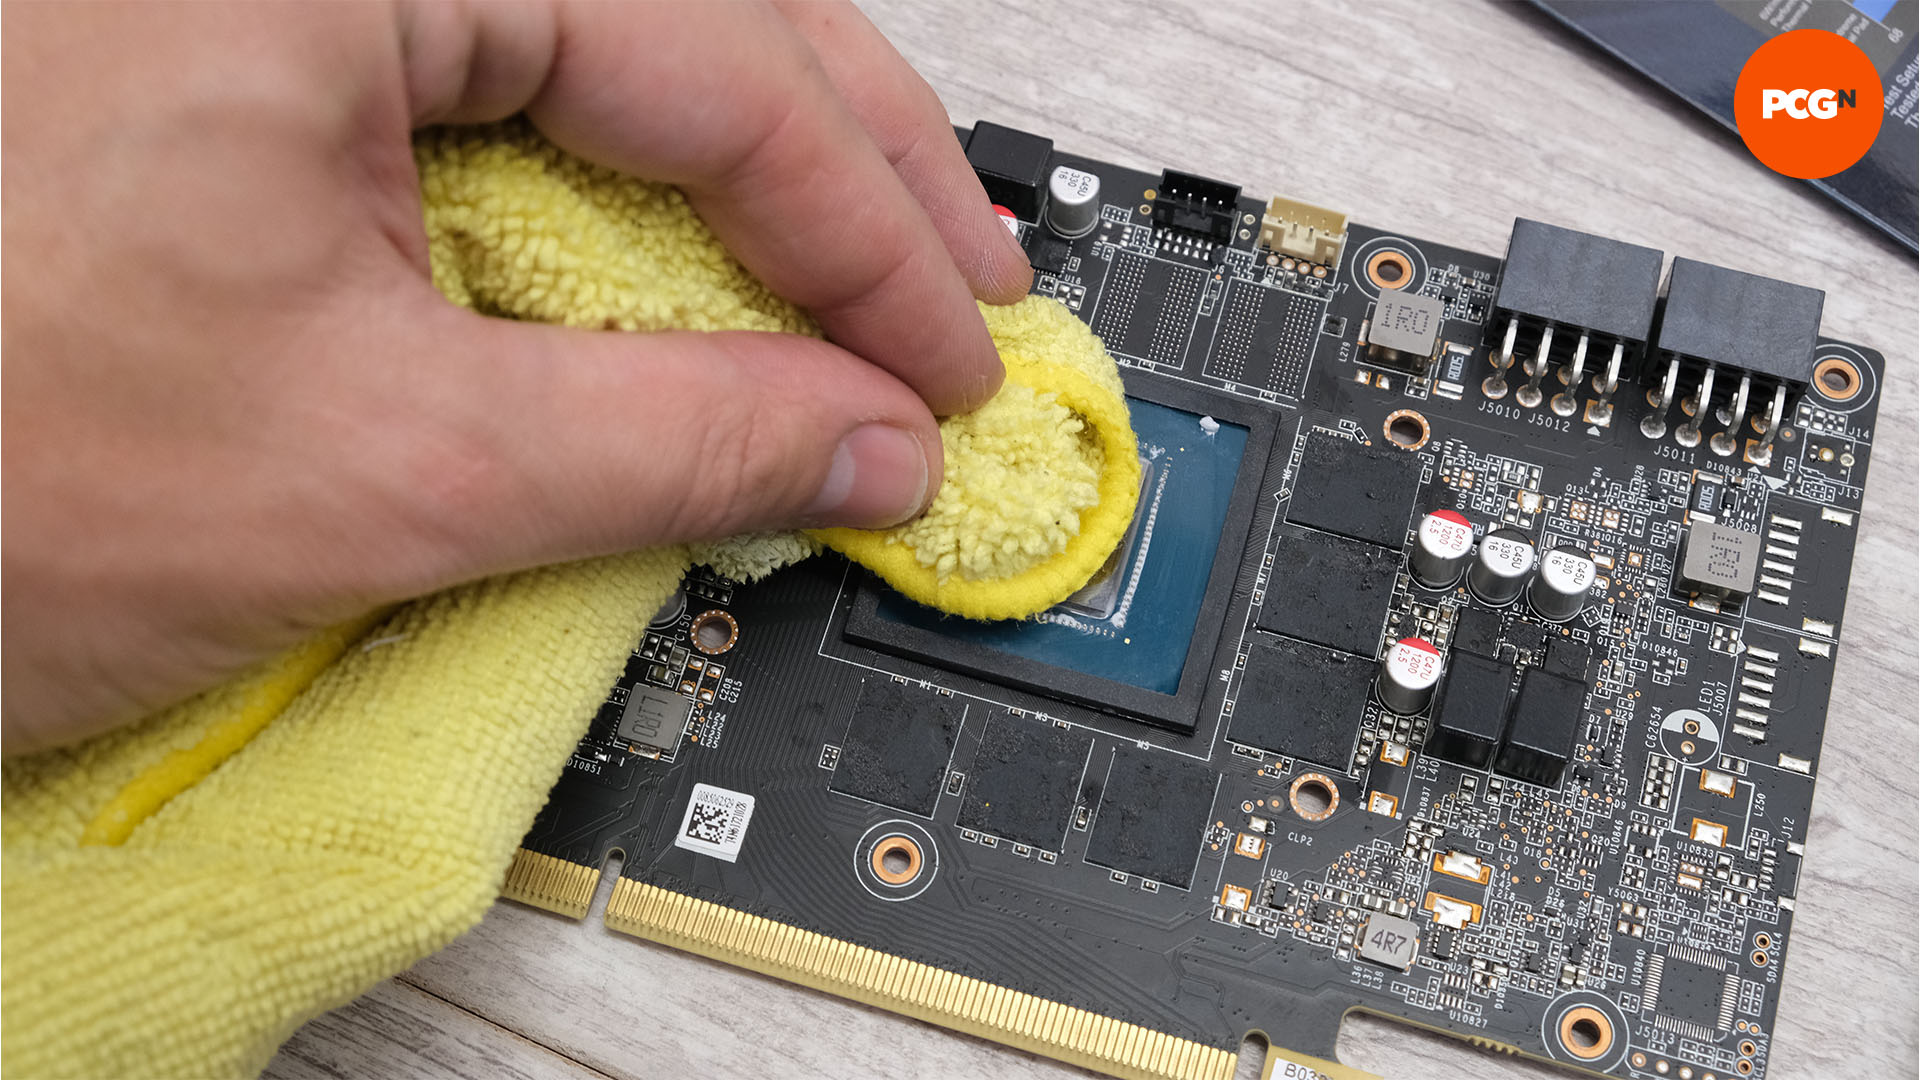 How to lower GPU temp: Clean off thermal paste